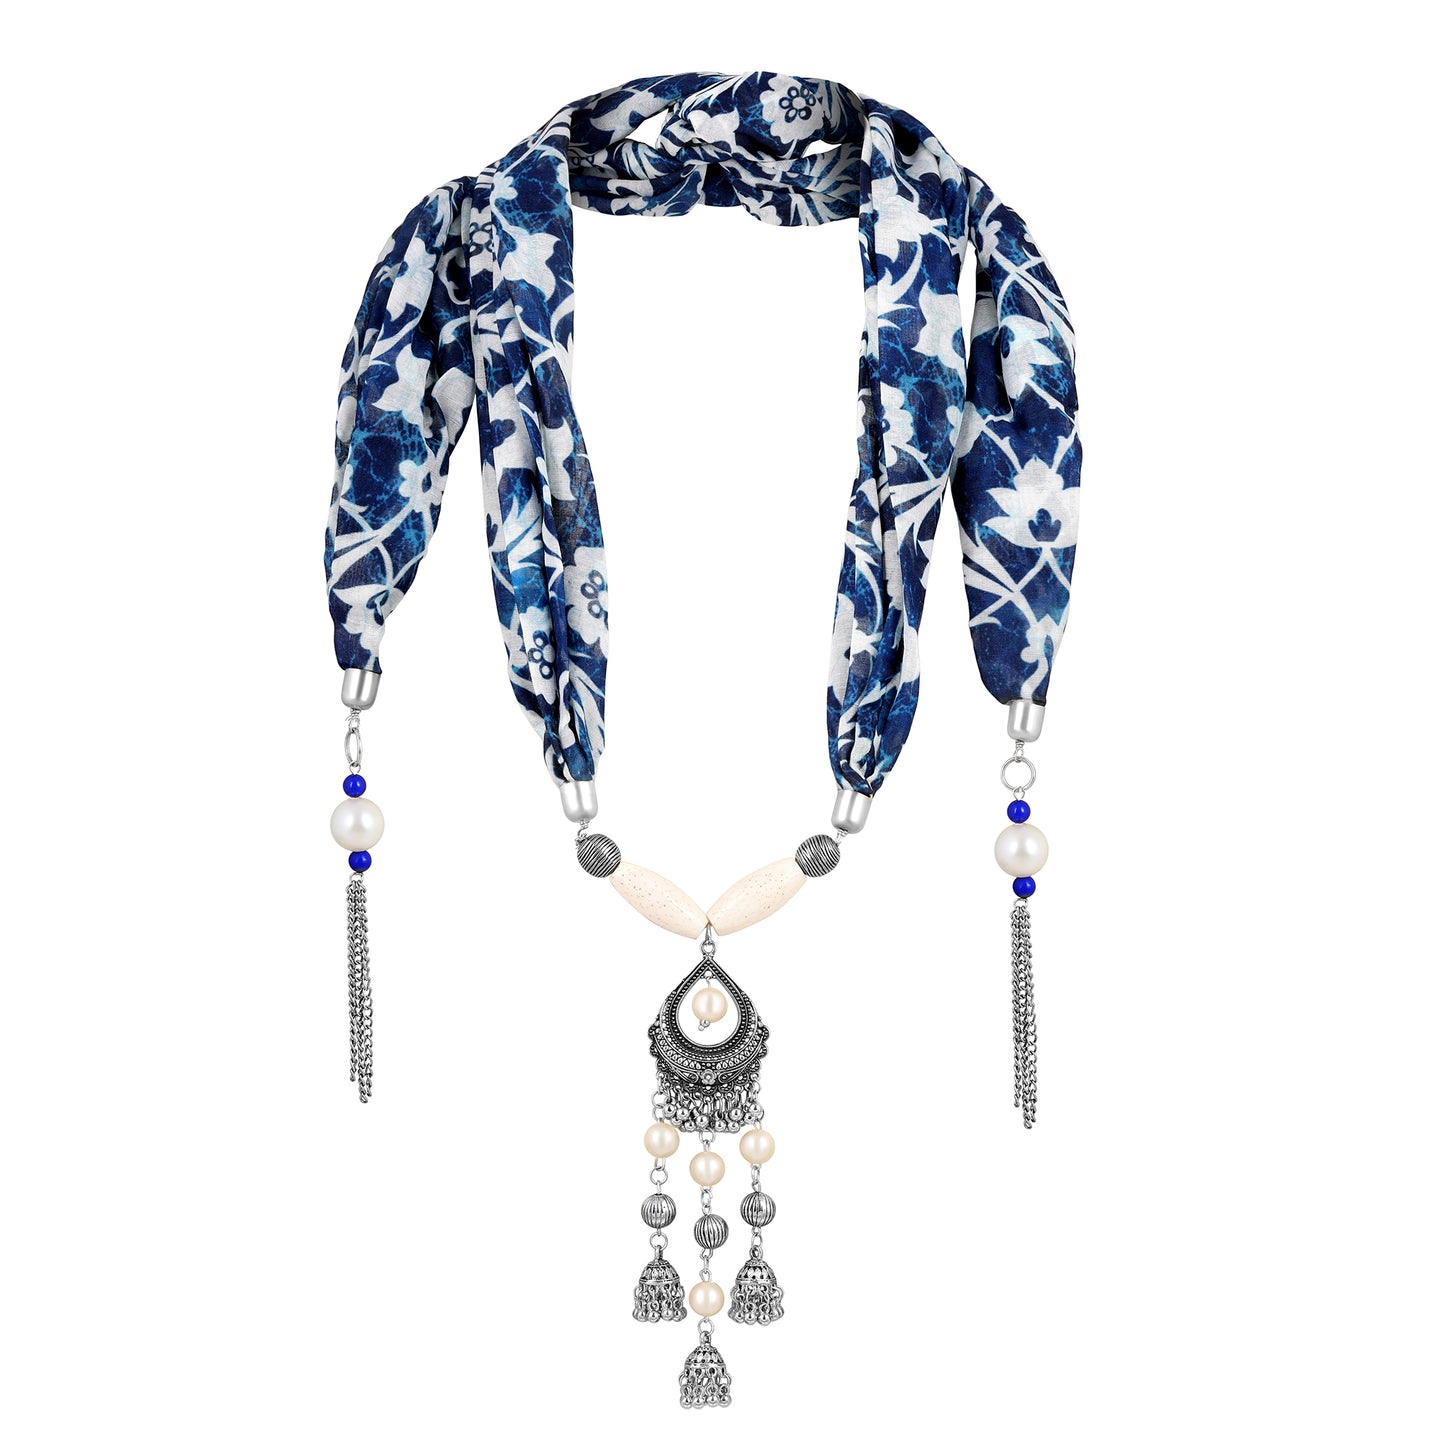 Bdiva Indigo Floral Scarf with Indian Jewelry and Motif.